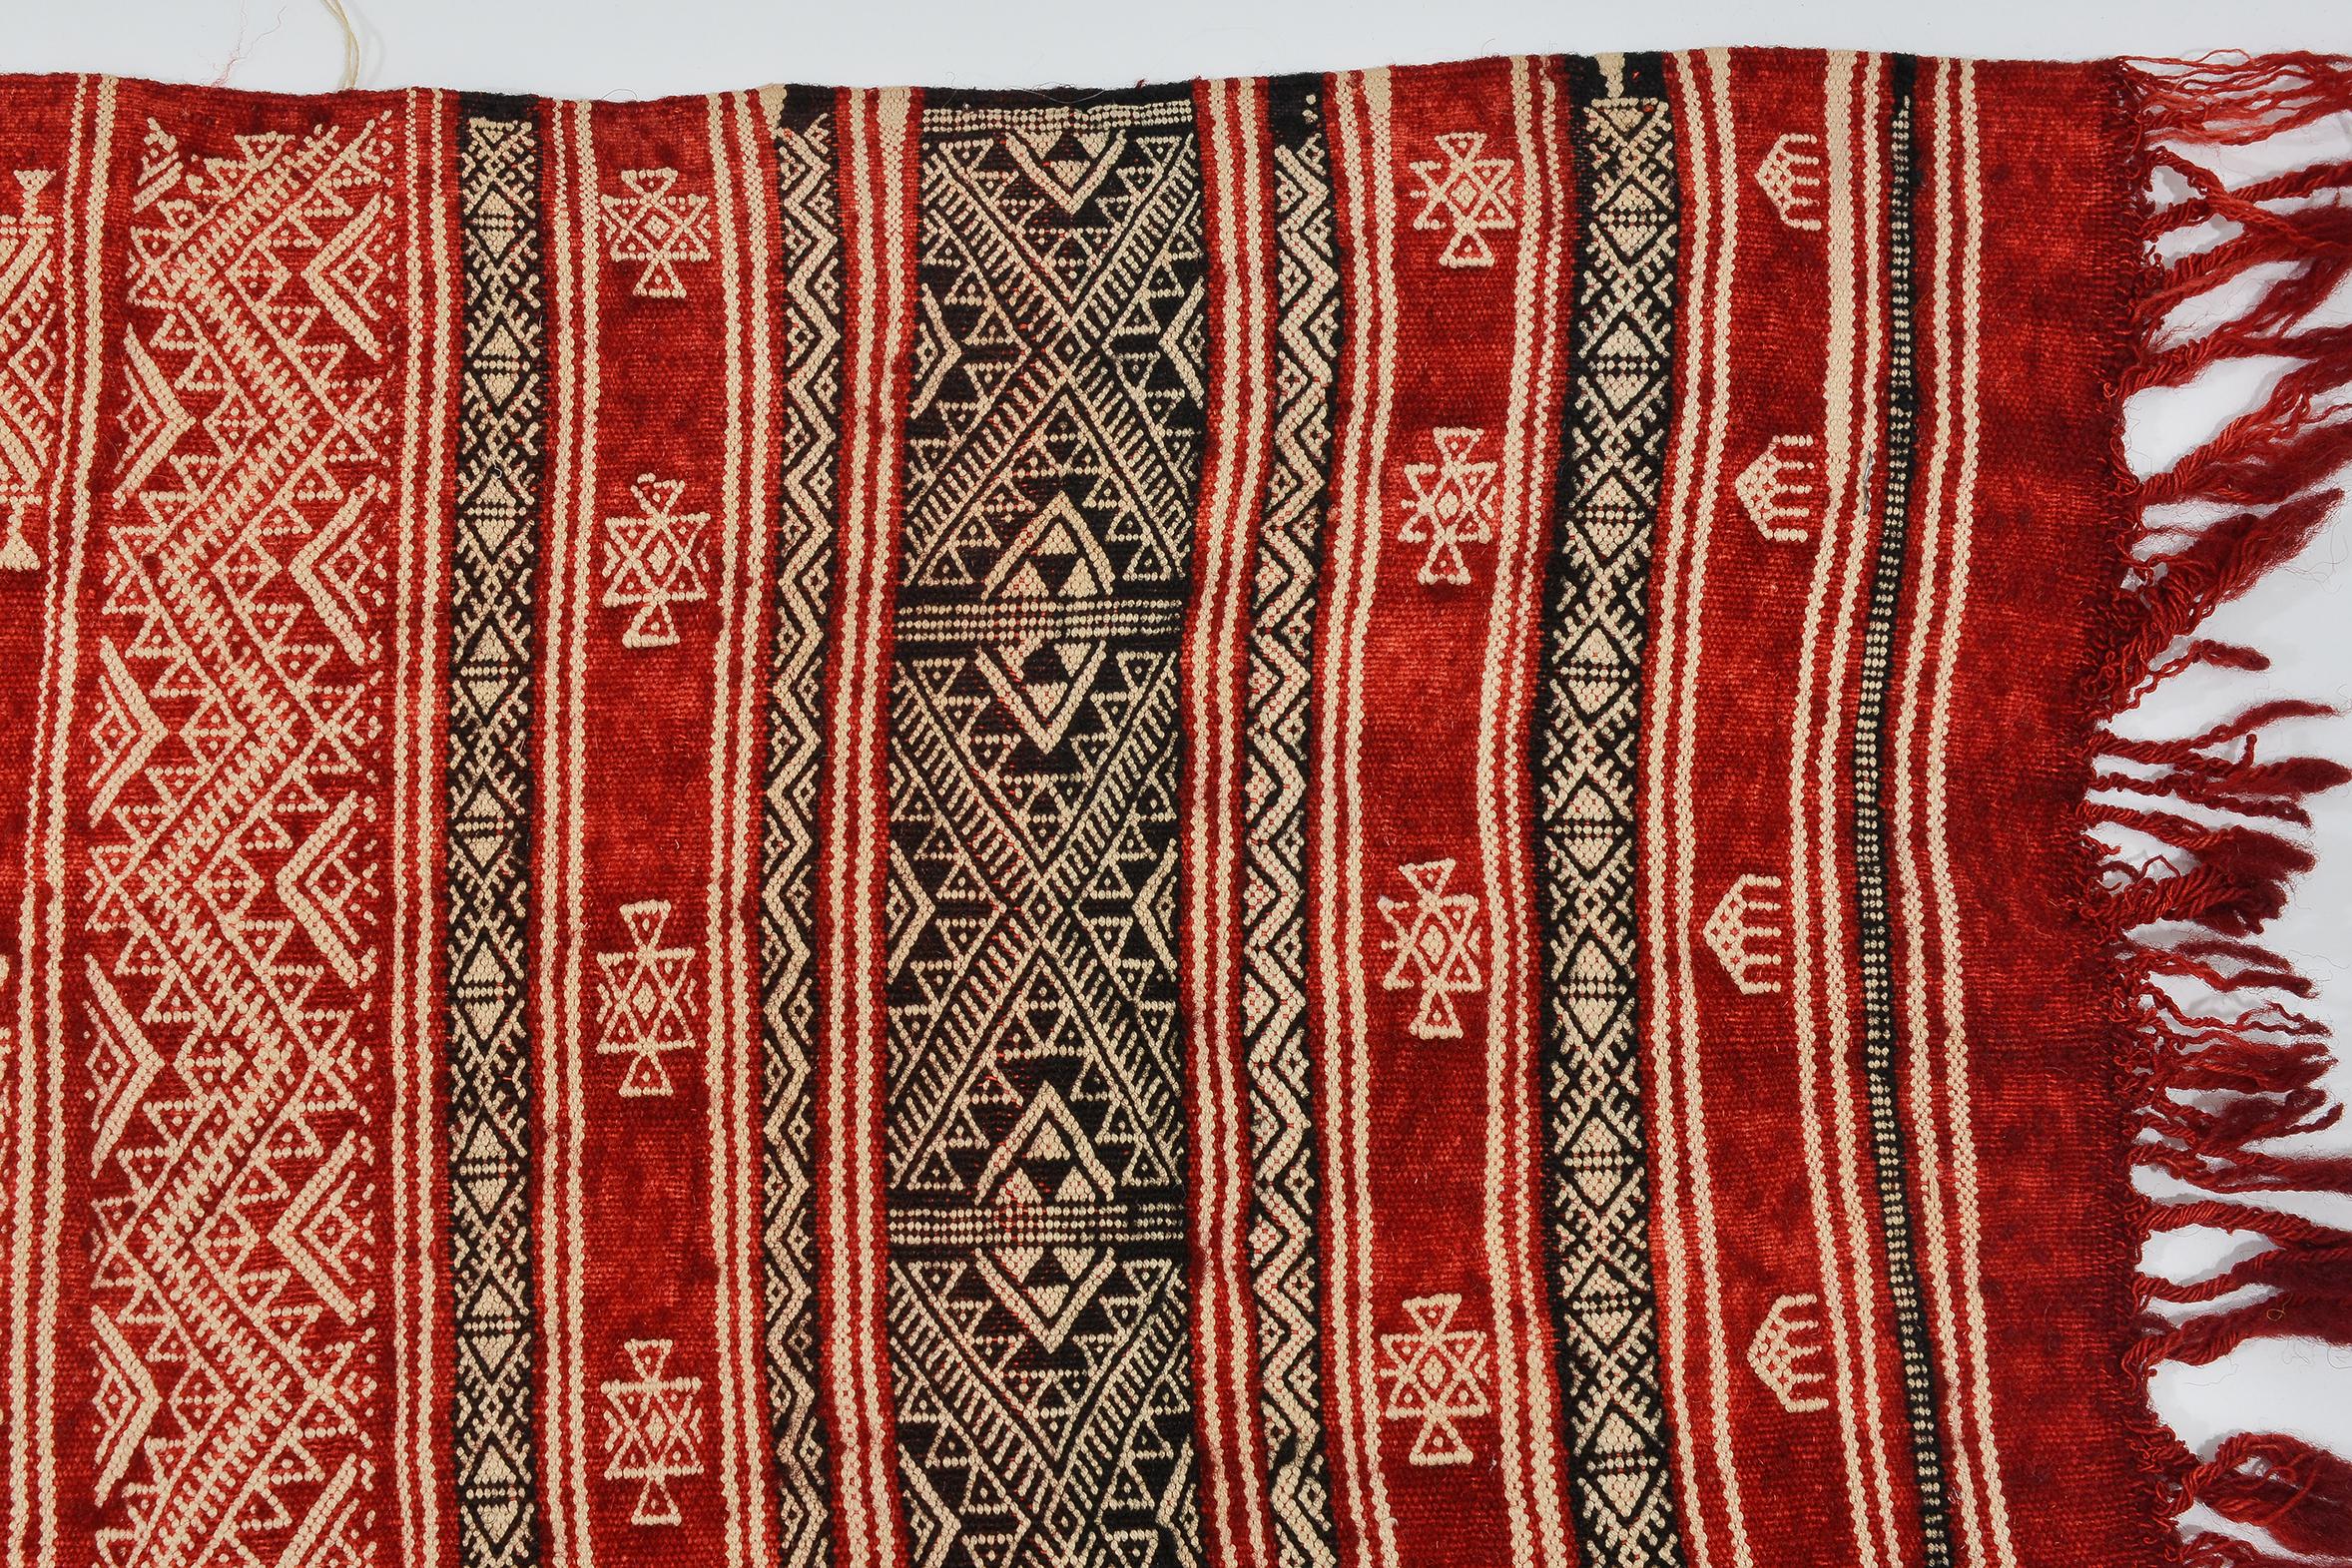 Rare Embroidered Ouedzem Tunisian Tissue or Carpet For Sale 3